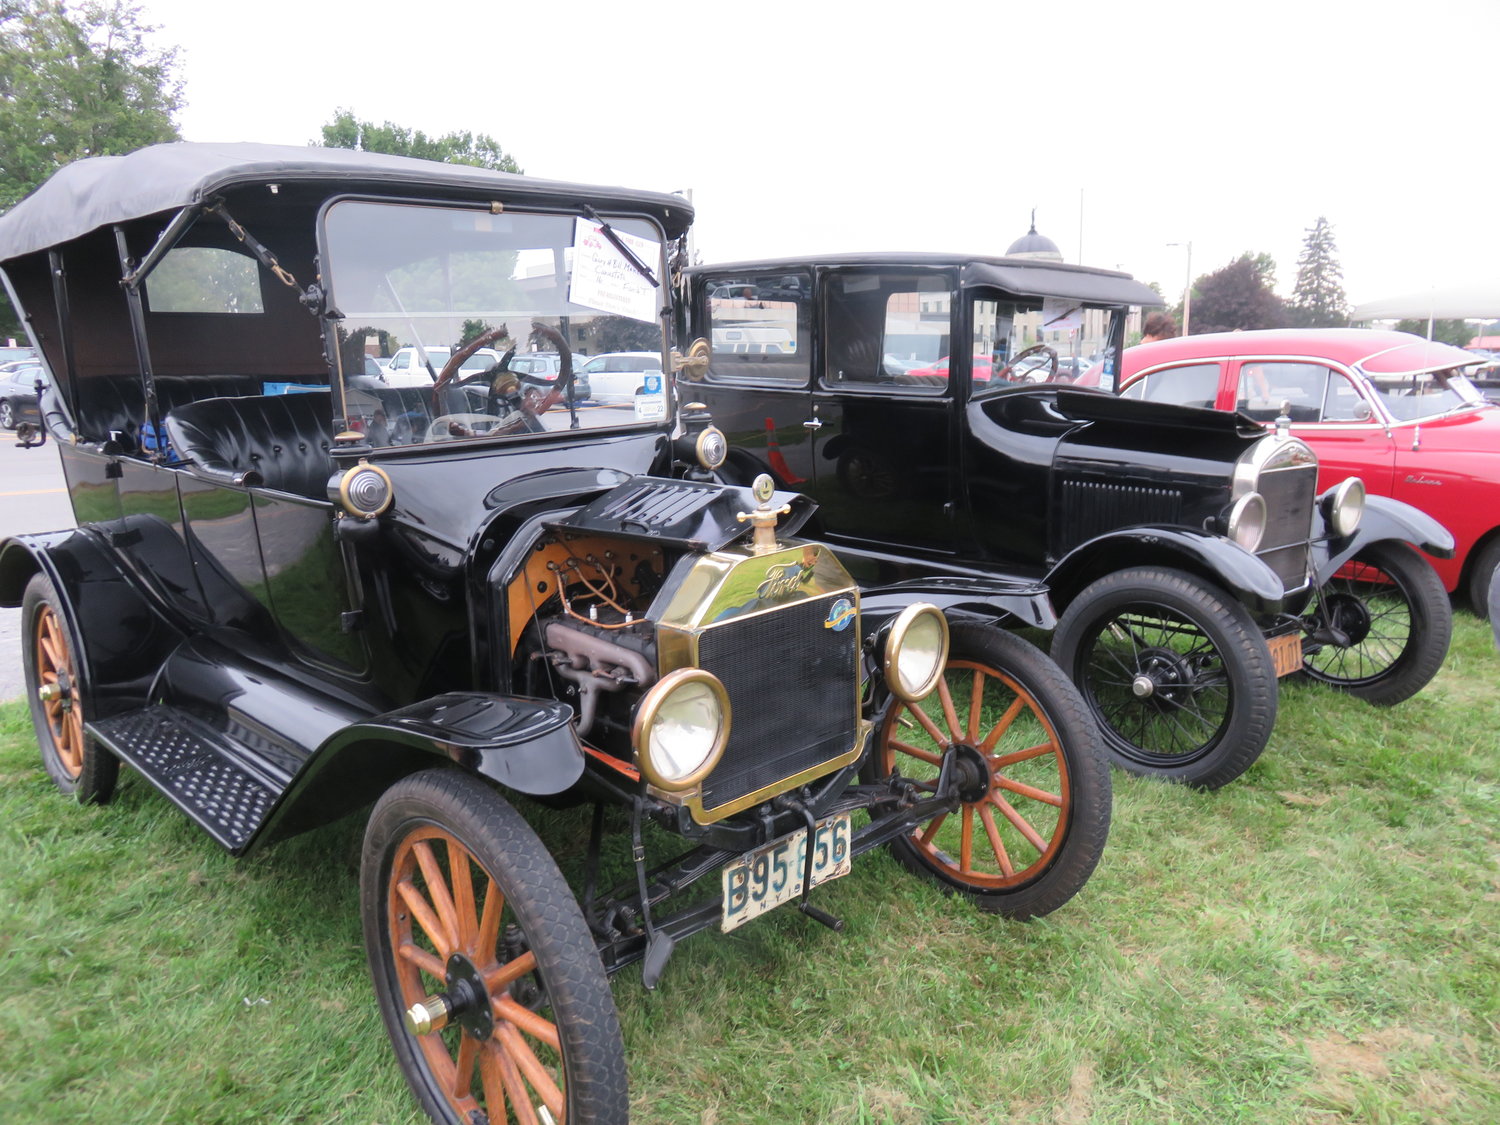 The Mohican Model A Ford Club will hold its 61st annual Antique Car Show and Flea Market at the Wampsville Firemen’s Field on Sunday, Sept. 11. There is no admission charge for visitors, but they are encouraged to contribute toward show expenses by purchasing raffle tickets to win several hundred dollars in prizes